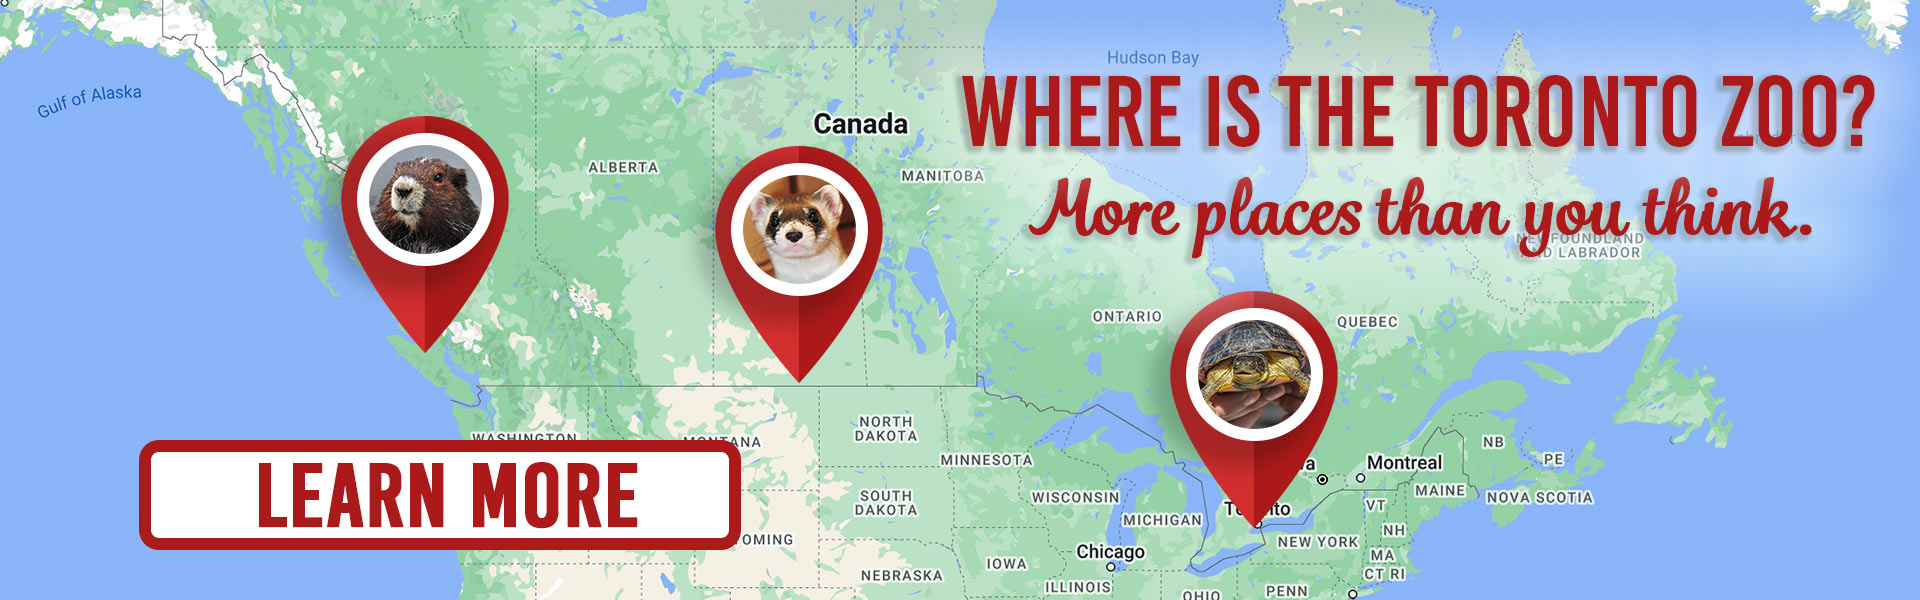 Where is the Toronto Zoo? More places then you think